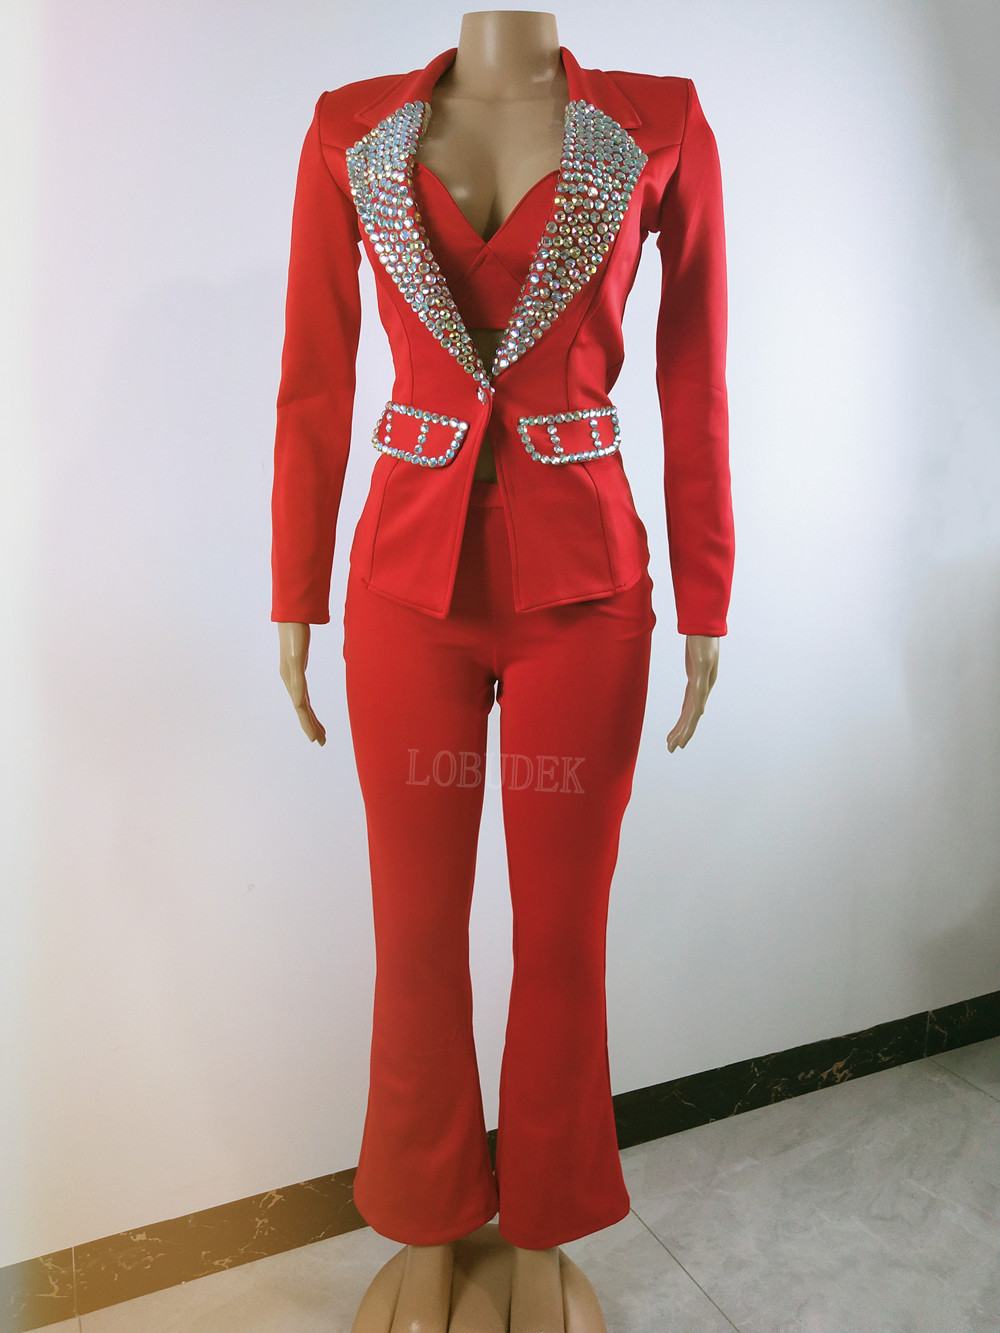 Women Pantsuits Red Rhinestones Collar Blazer Bra Pants 3 Piece Set Fashion Birthday Prom Banquet Party Outfit Formal Clothes